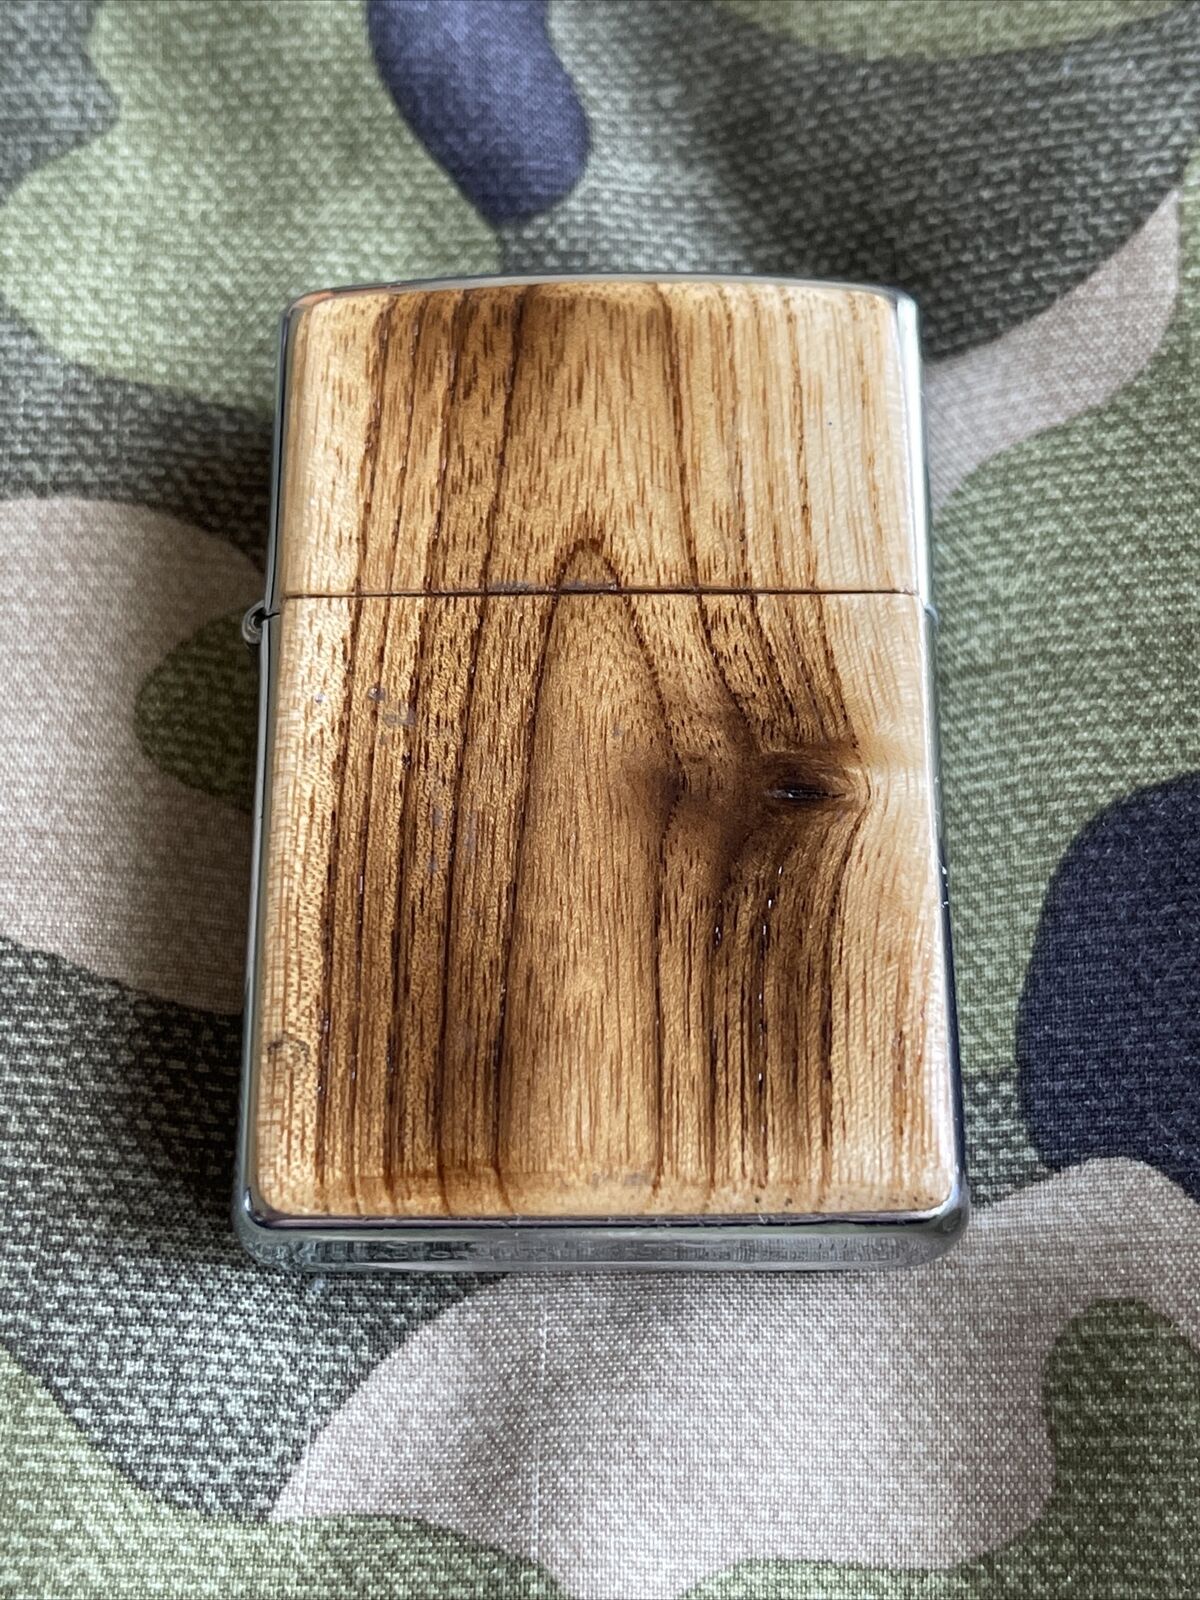 1997 Vintage Zippo Lighter - Wood Grain Finish - One of a Kind